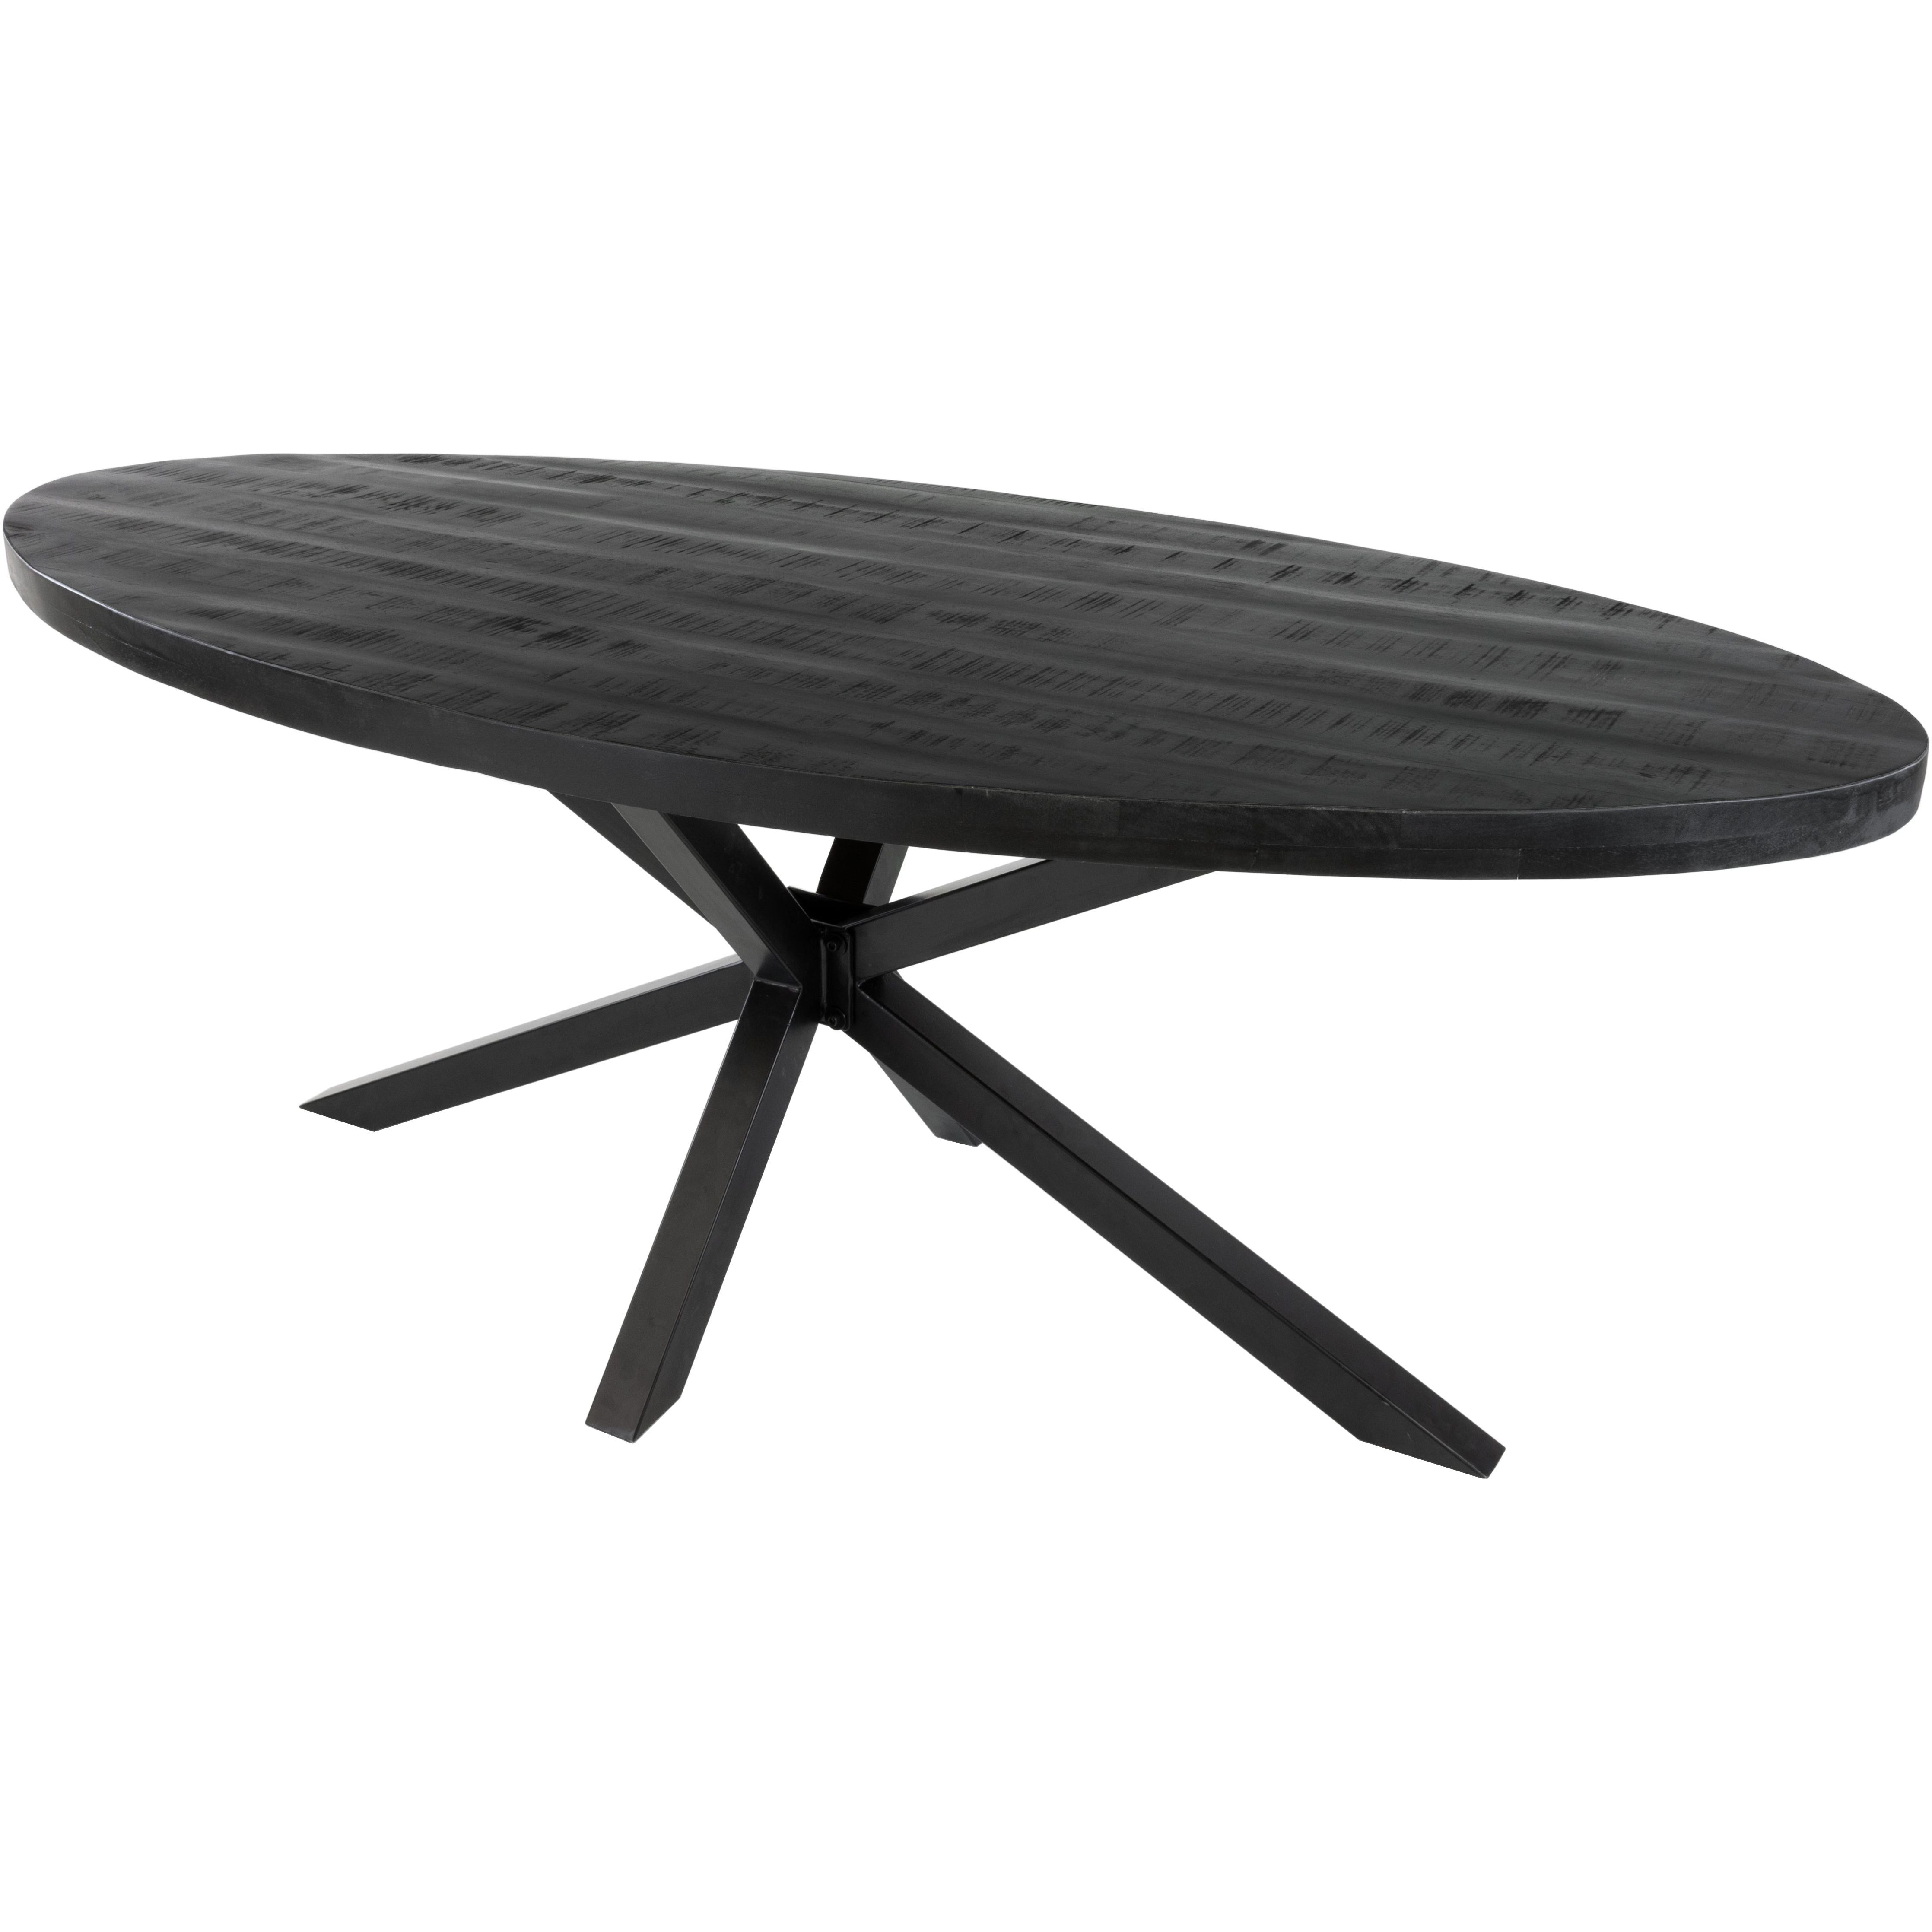 Kick dining table Dax oval - 210cm